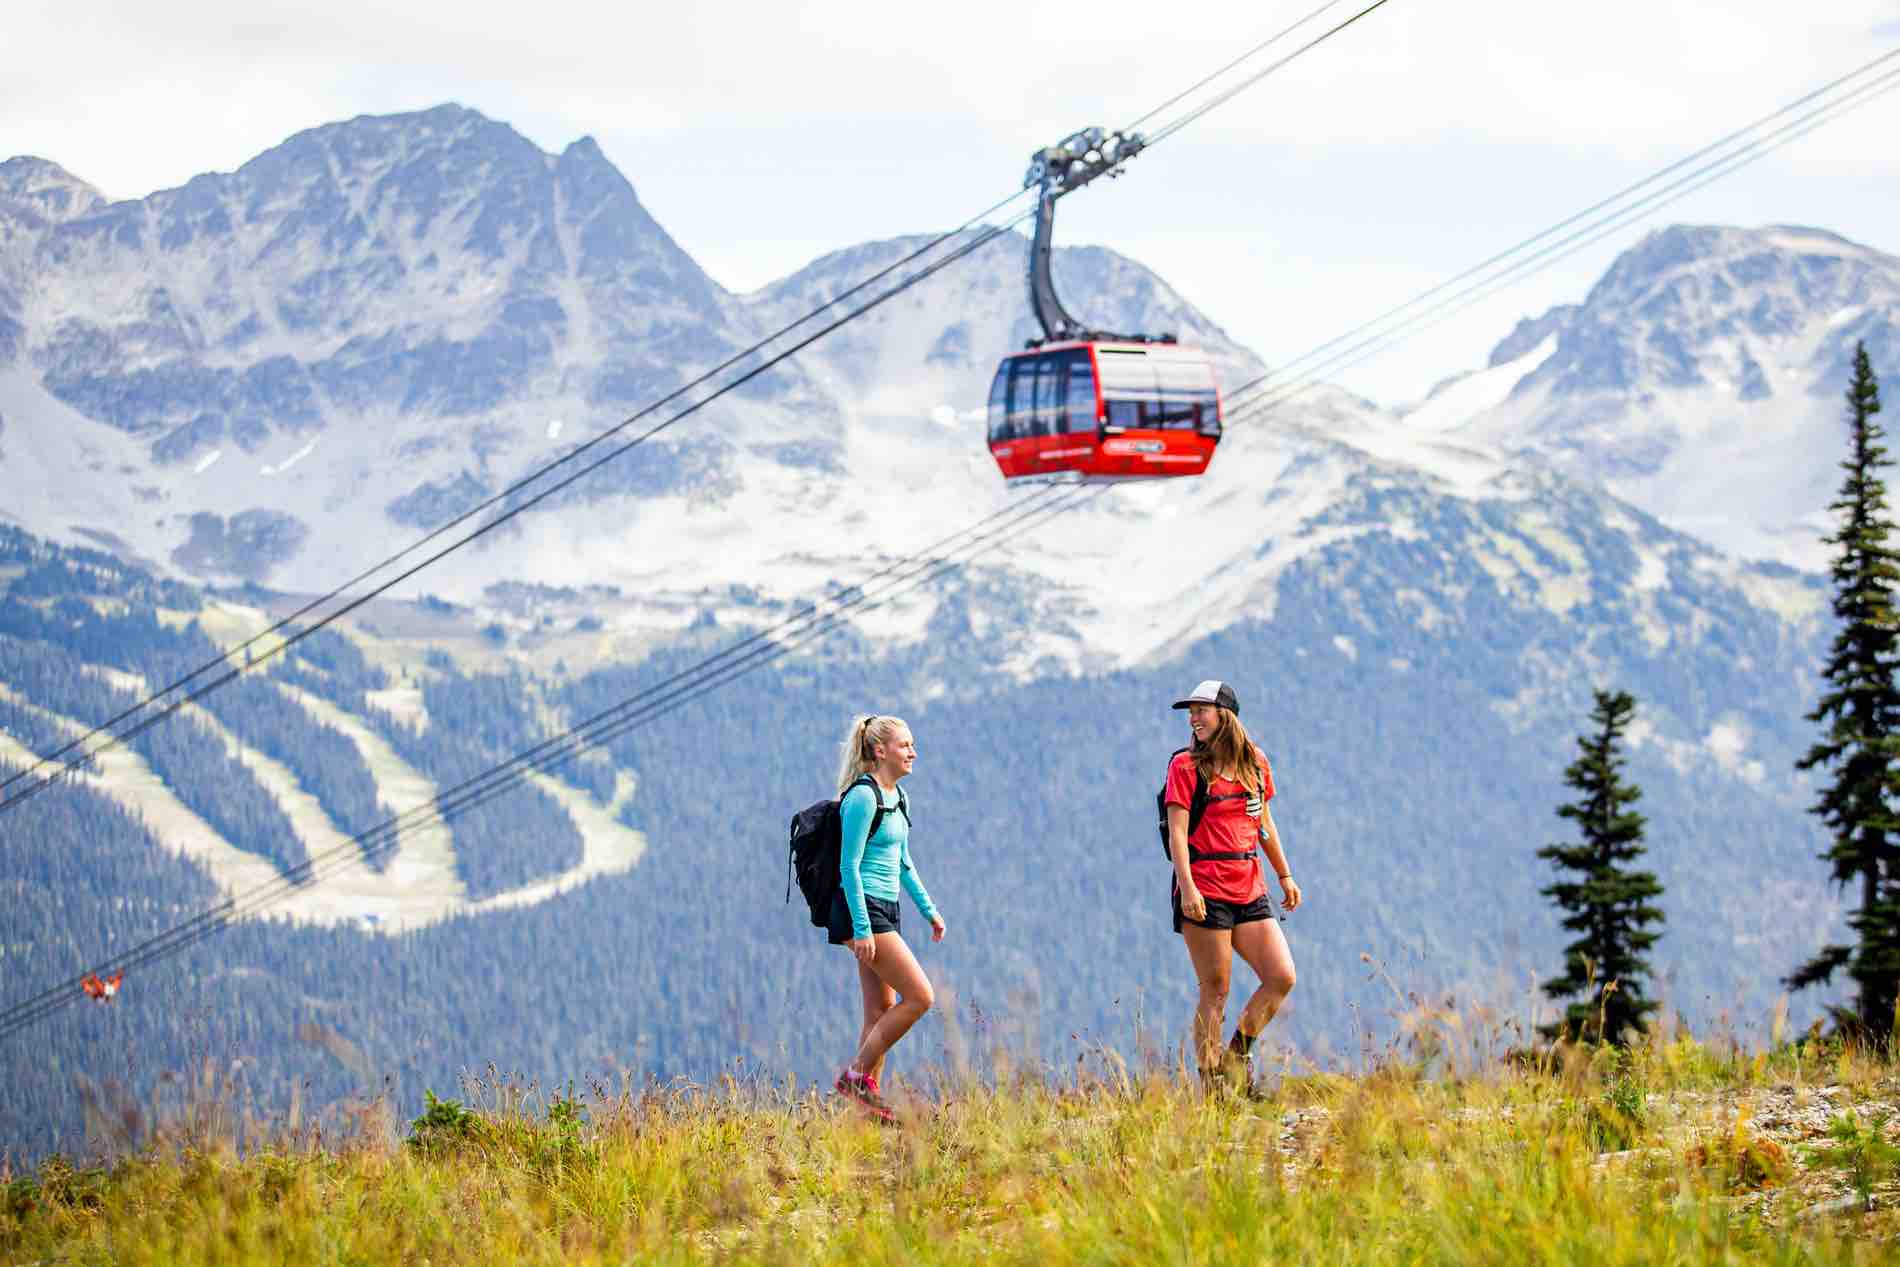 Two women hike in the mountains in the summer carrying backpacks. The red Peak 2 Peak Gondola goes overhead behind them. Whistler mountain is seen behind them.